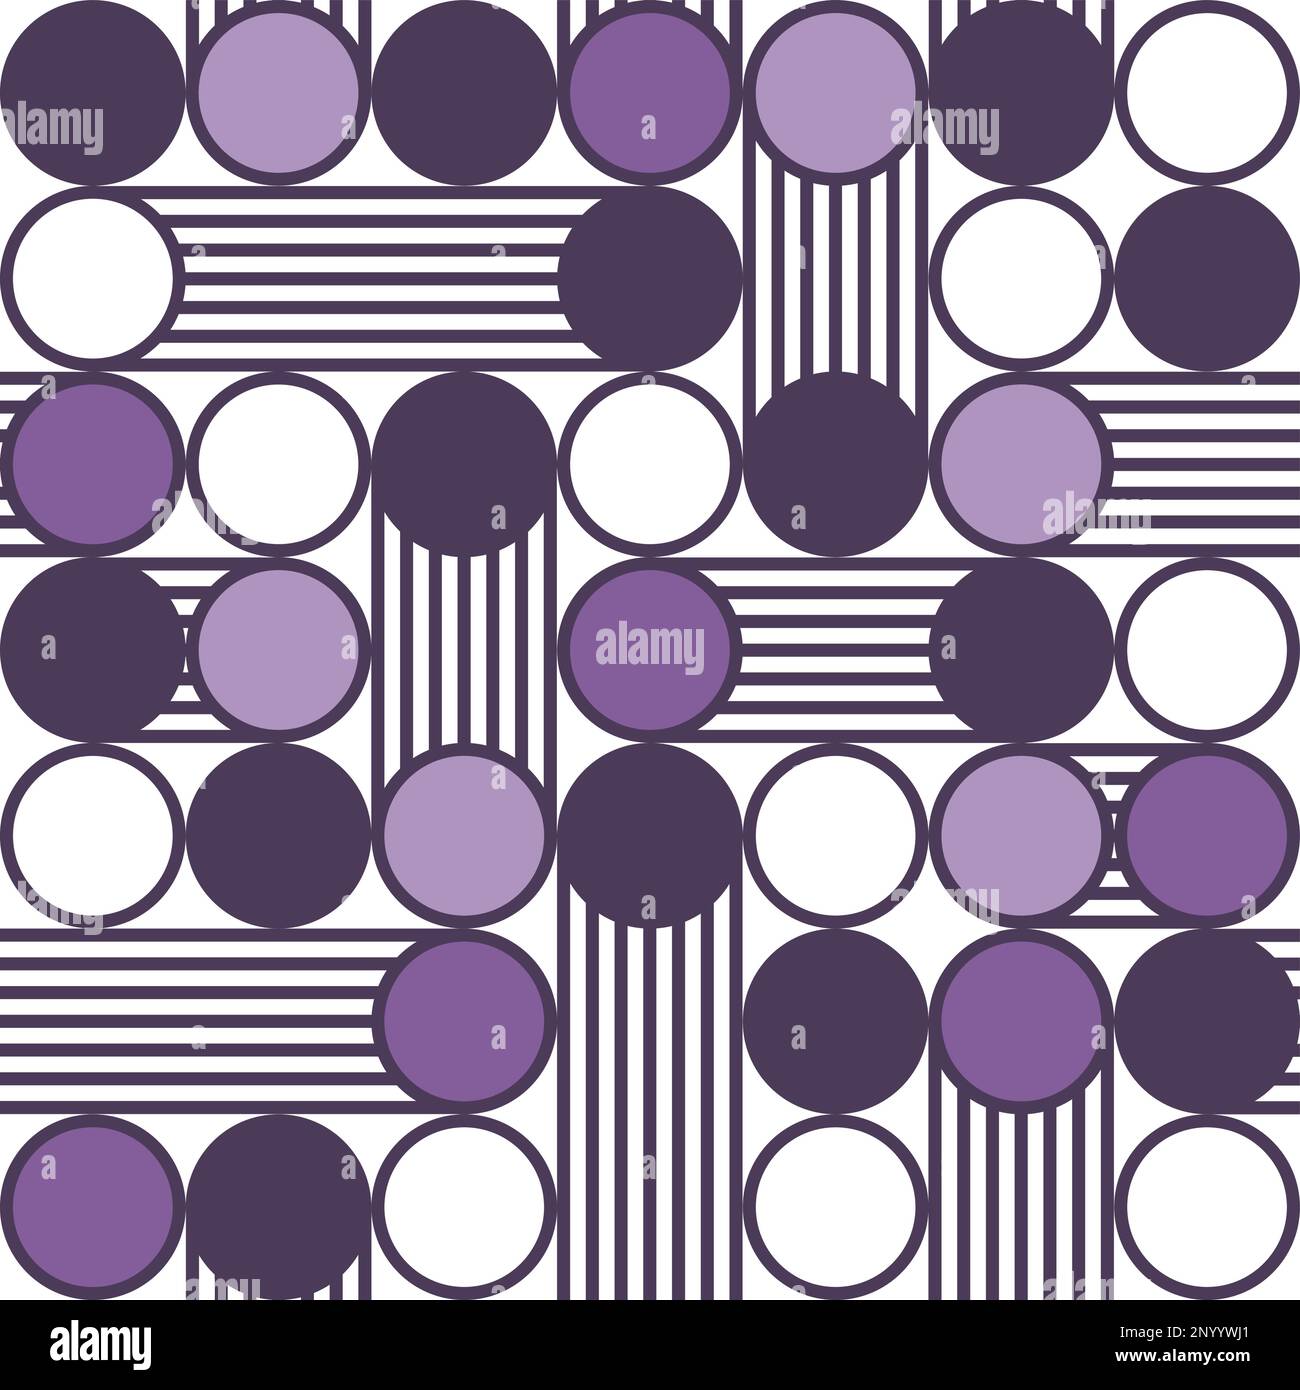 Vector Retro Circles and Stripes Seamless Pattern for Fabric or Wallpaper Print, Purple and White. Stock Vector